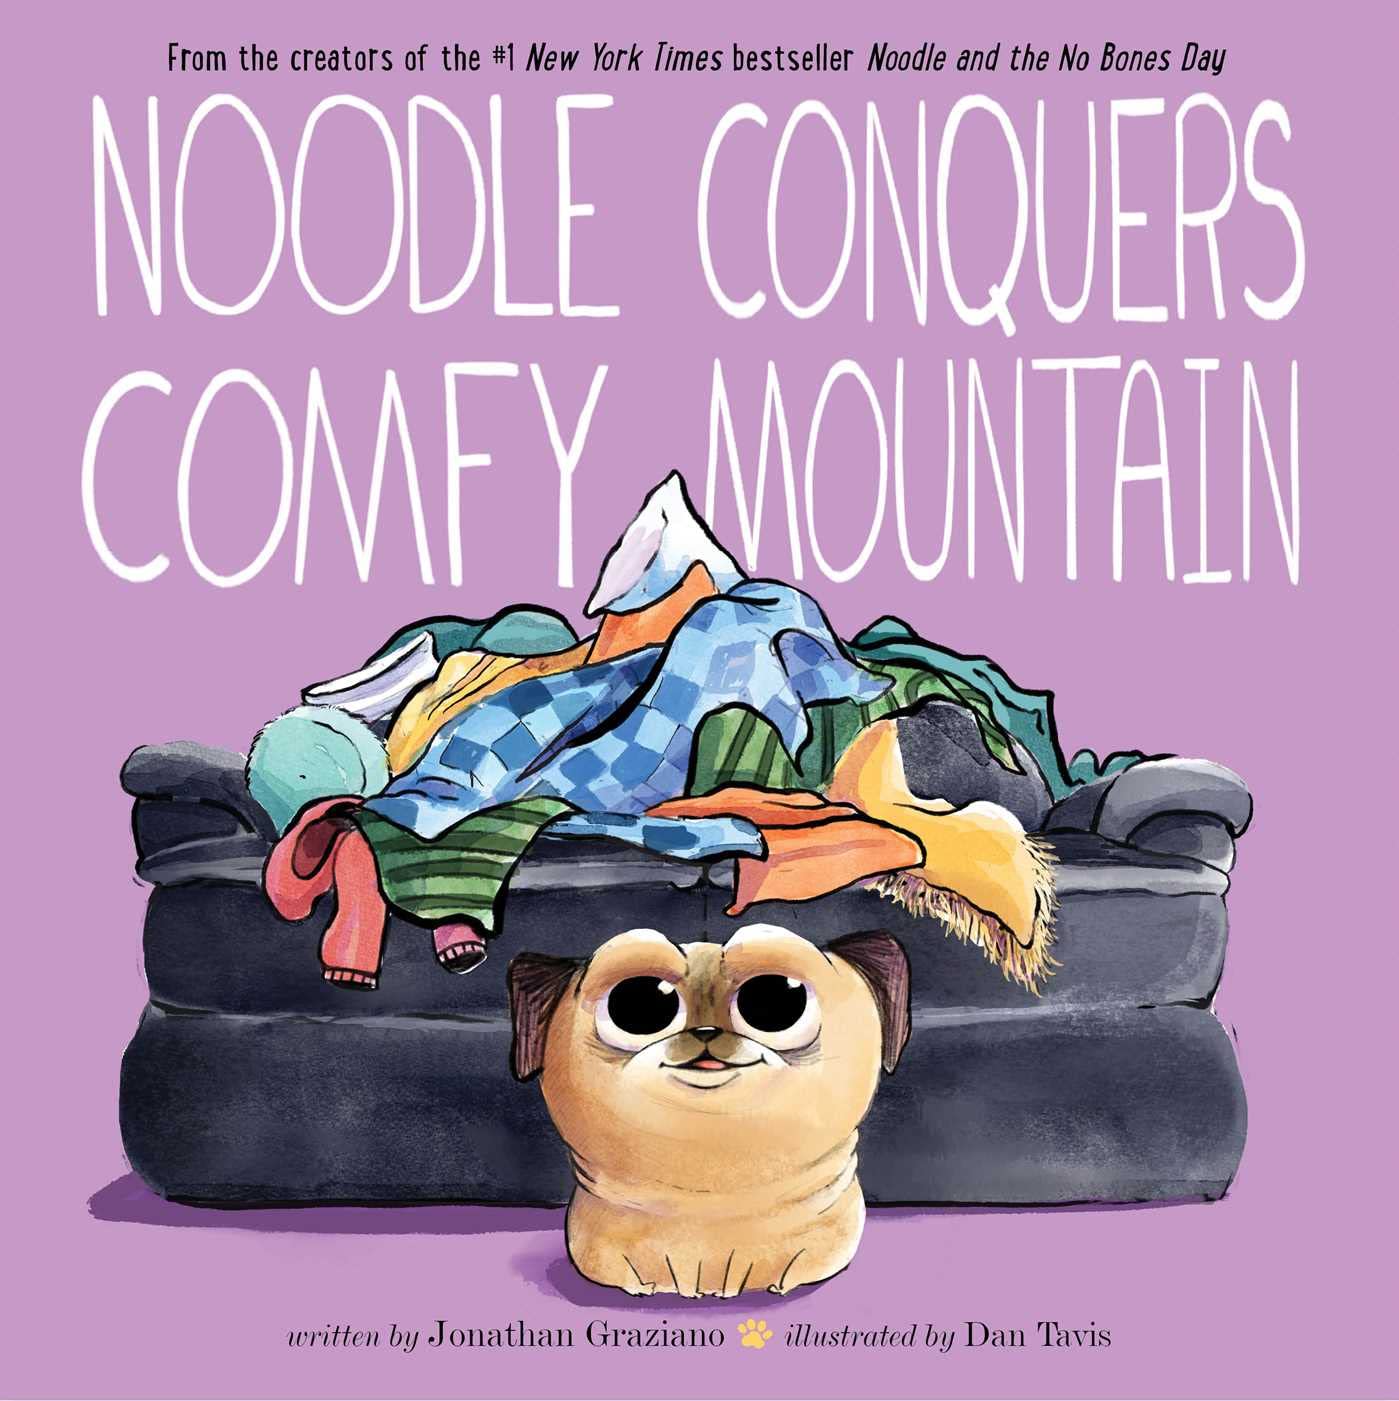 Image for "Noodle Conquers Comfy Mountain"